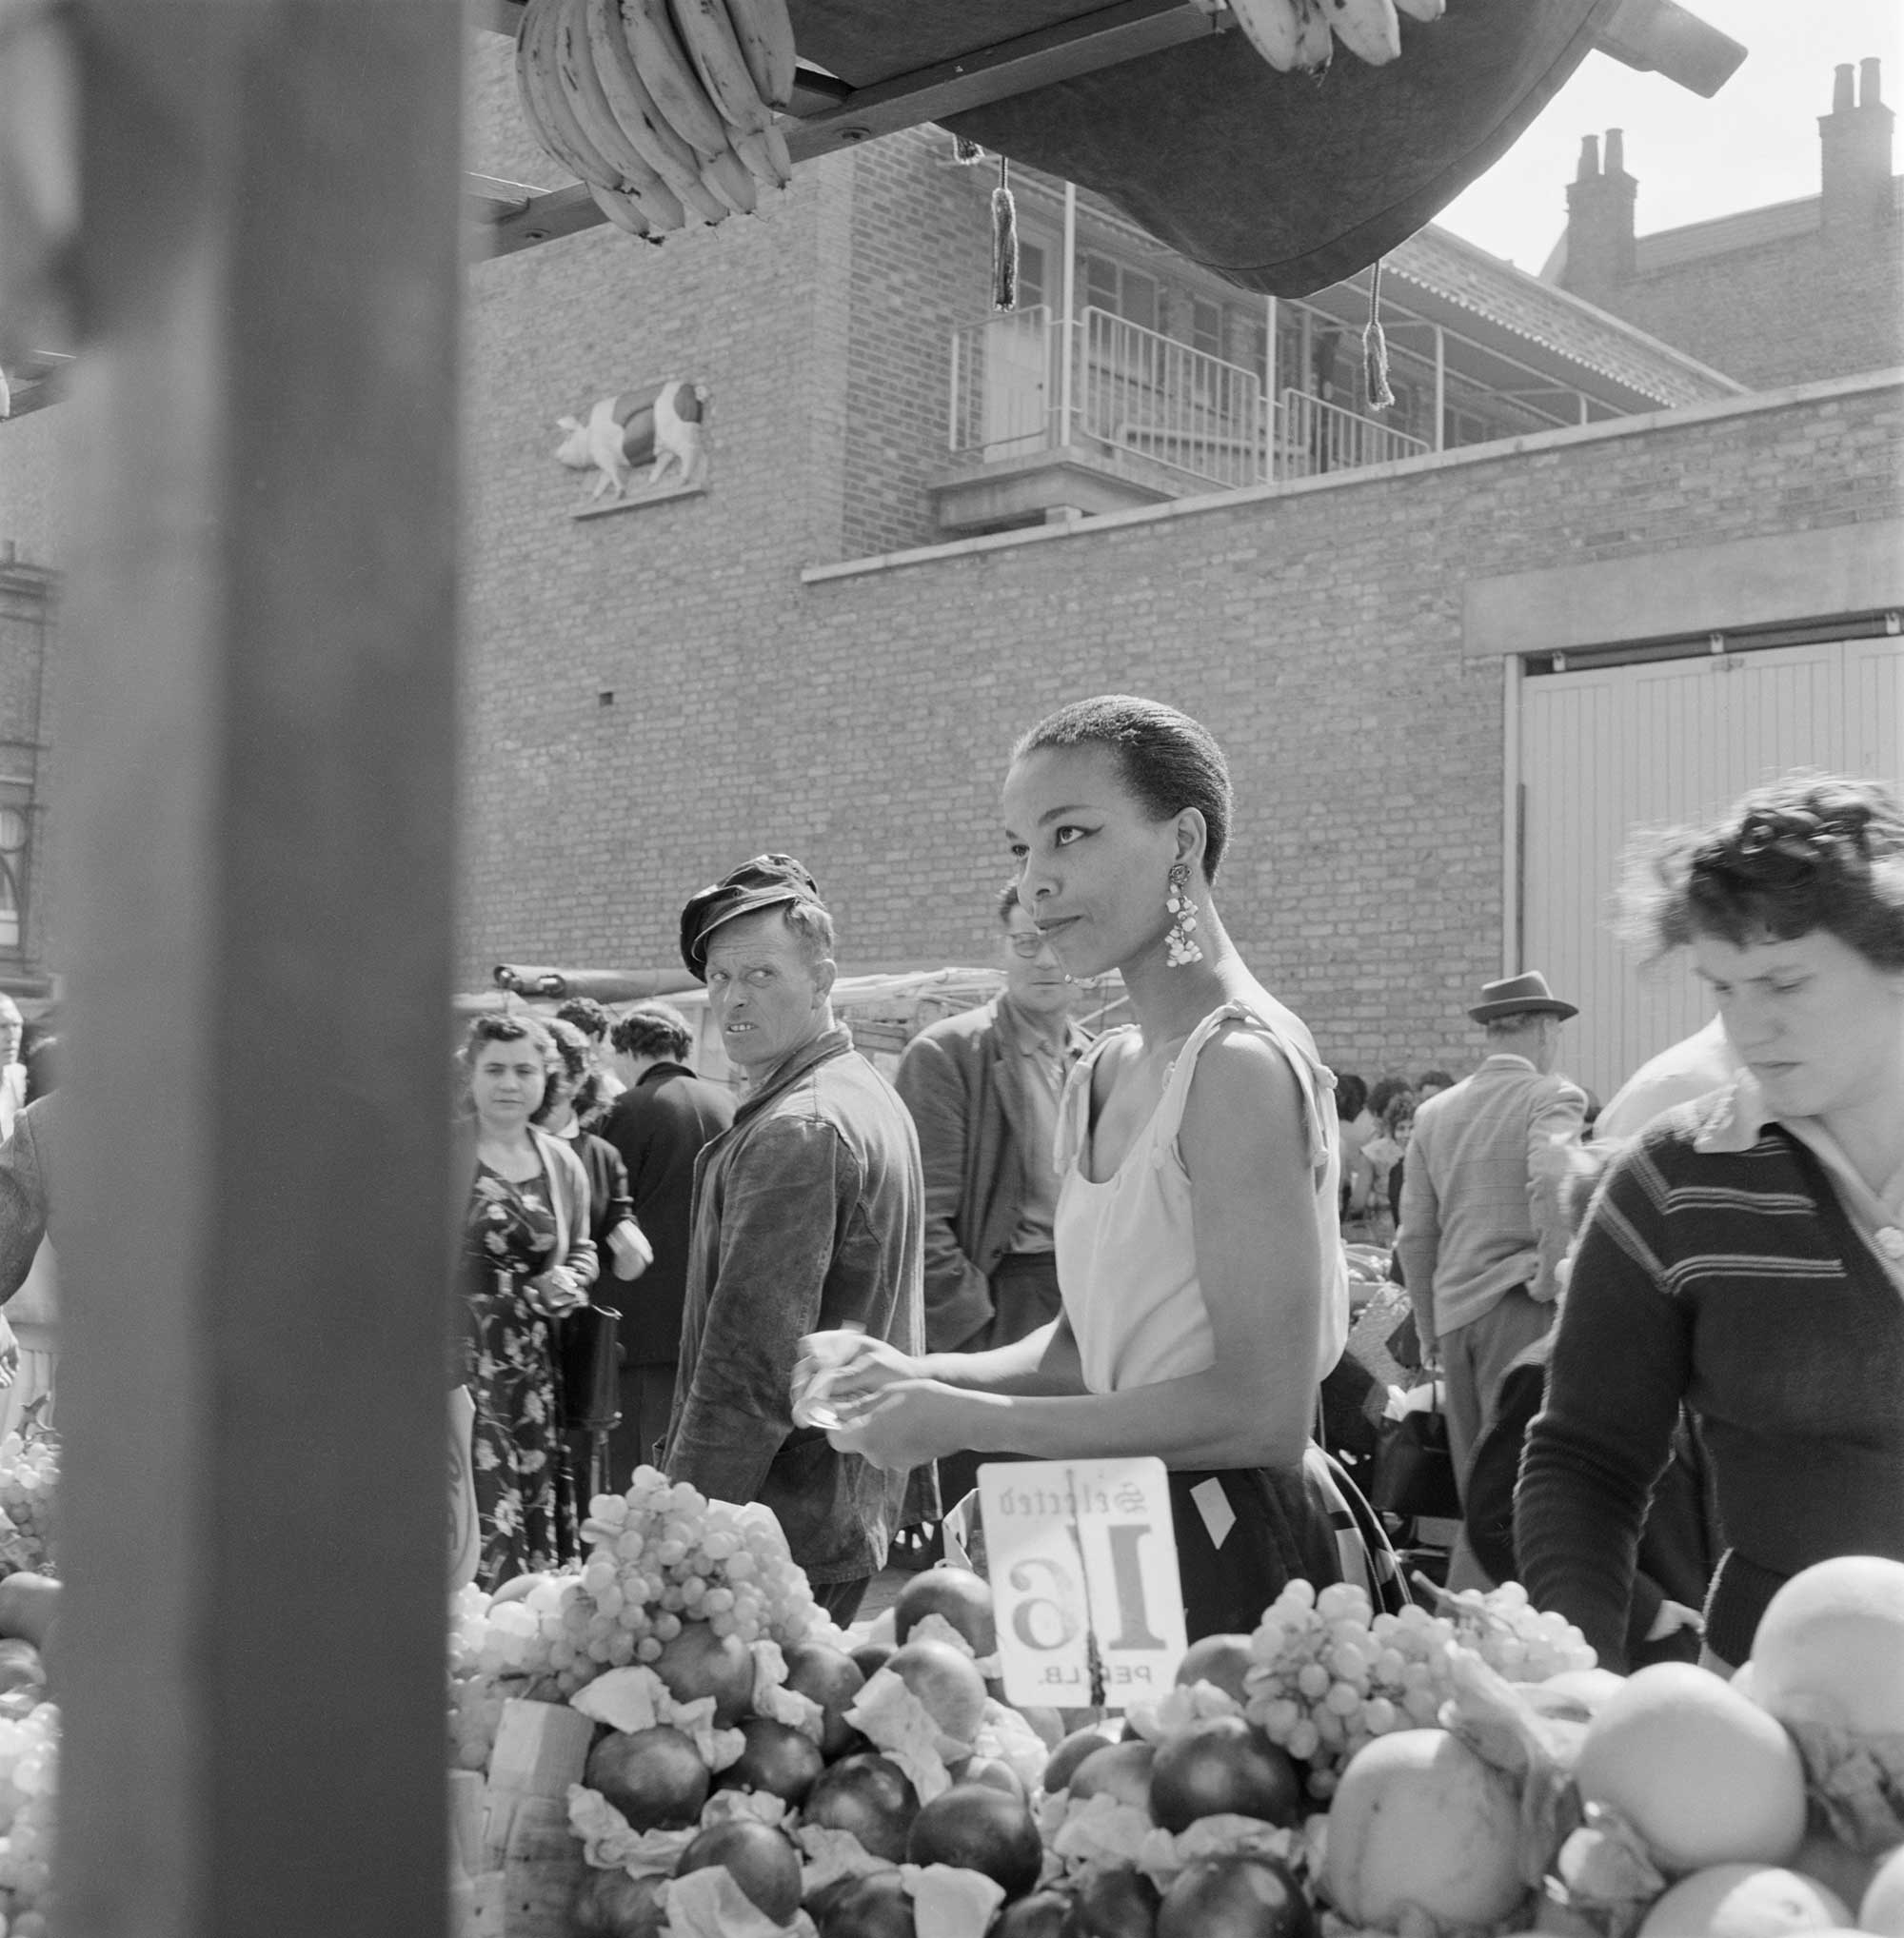 An informal portrait of a young black woman buying fruit at an unidentified open air market in north london, with a man looking back over his shoulder at her.